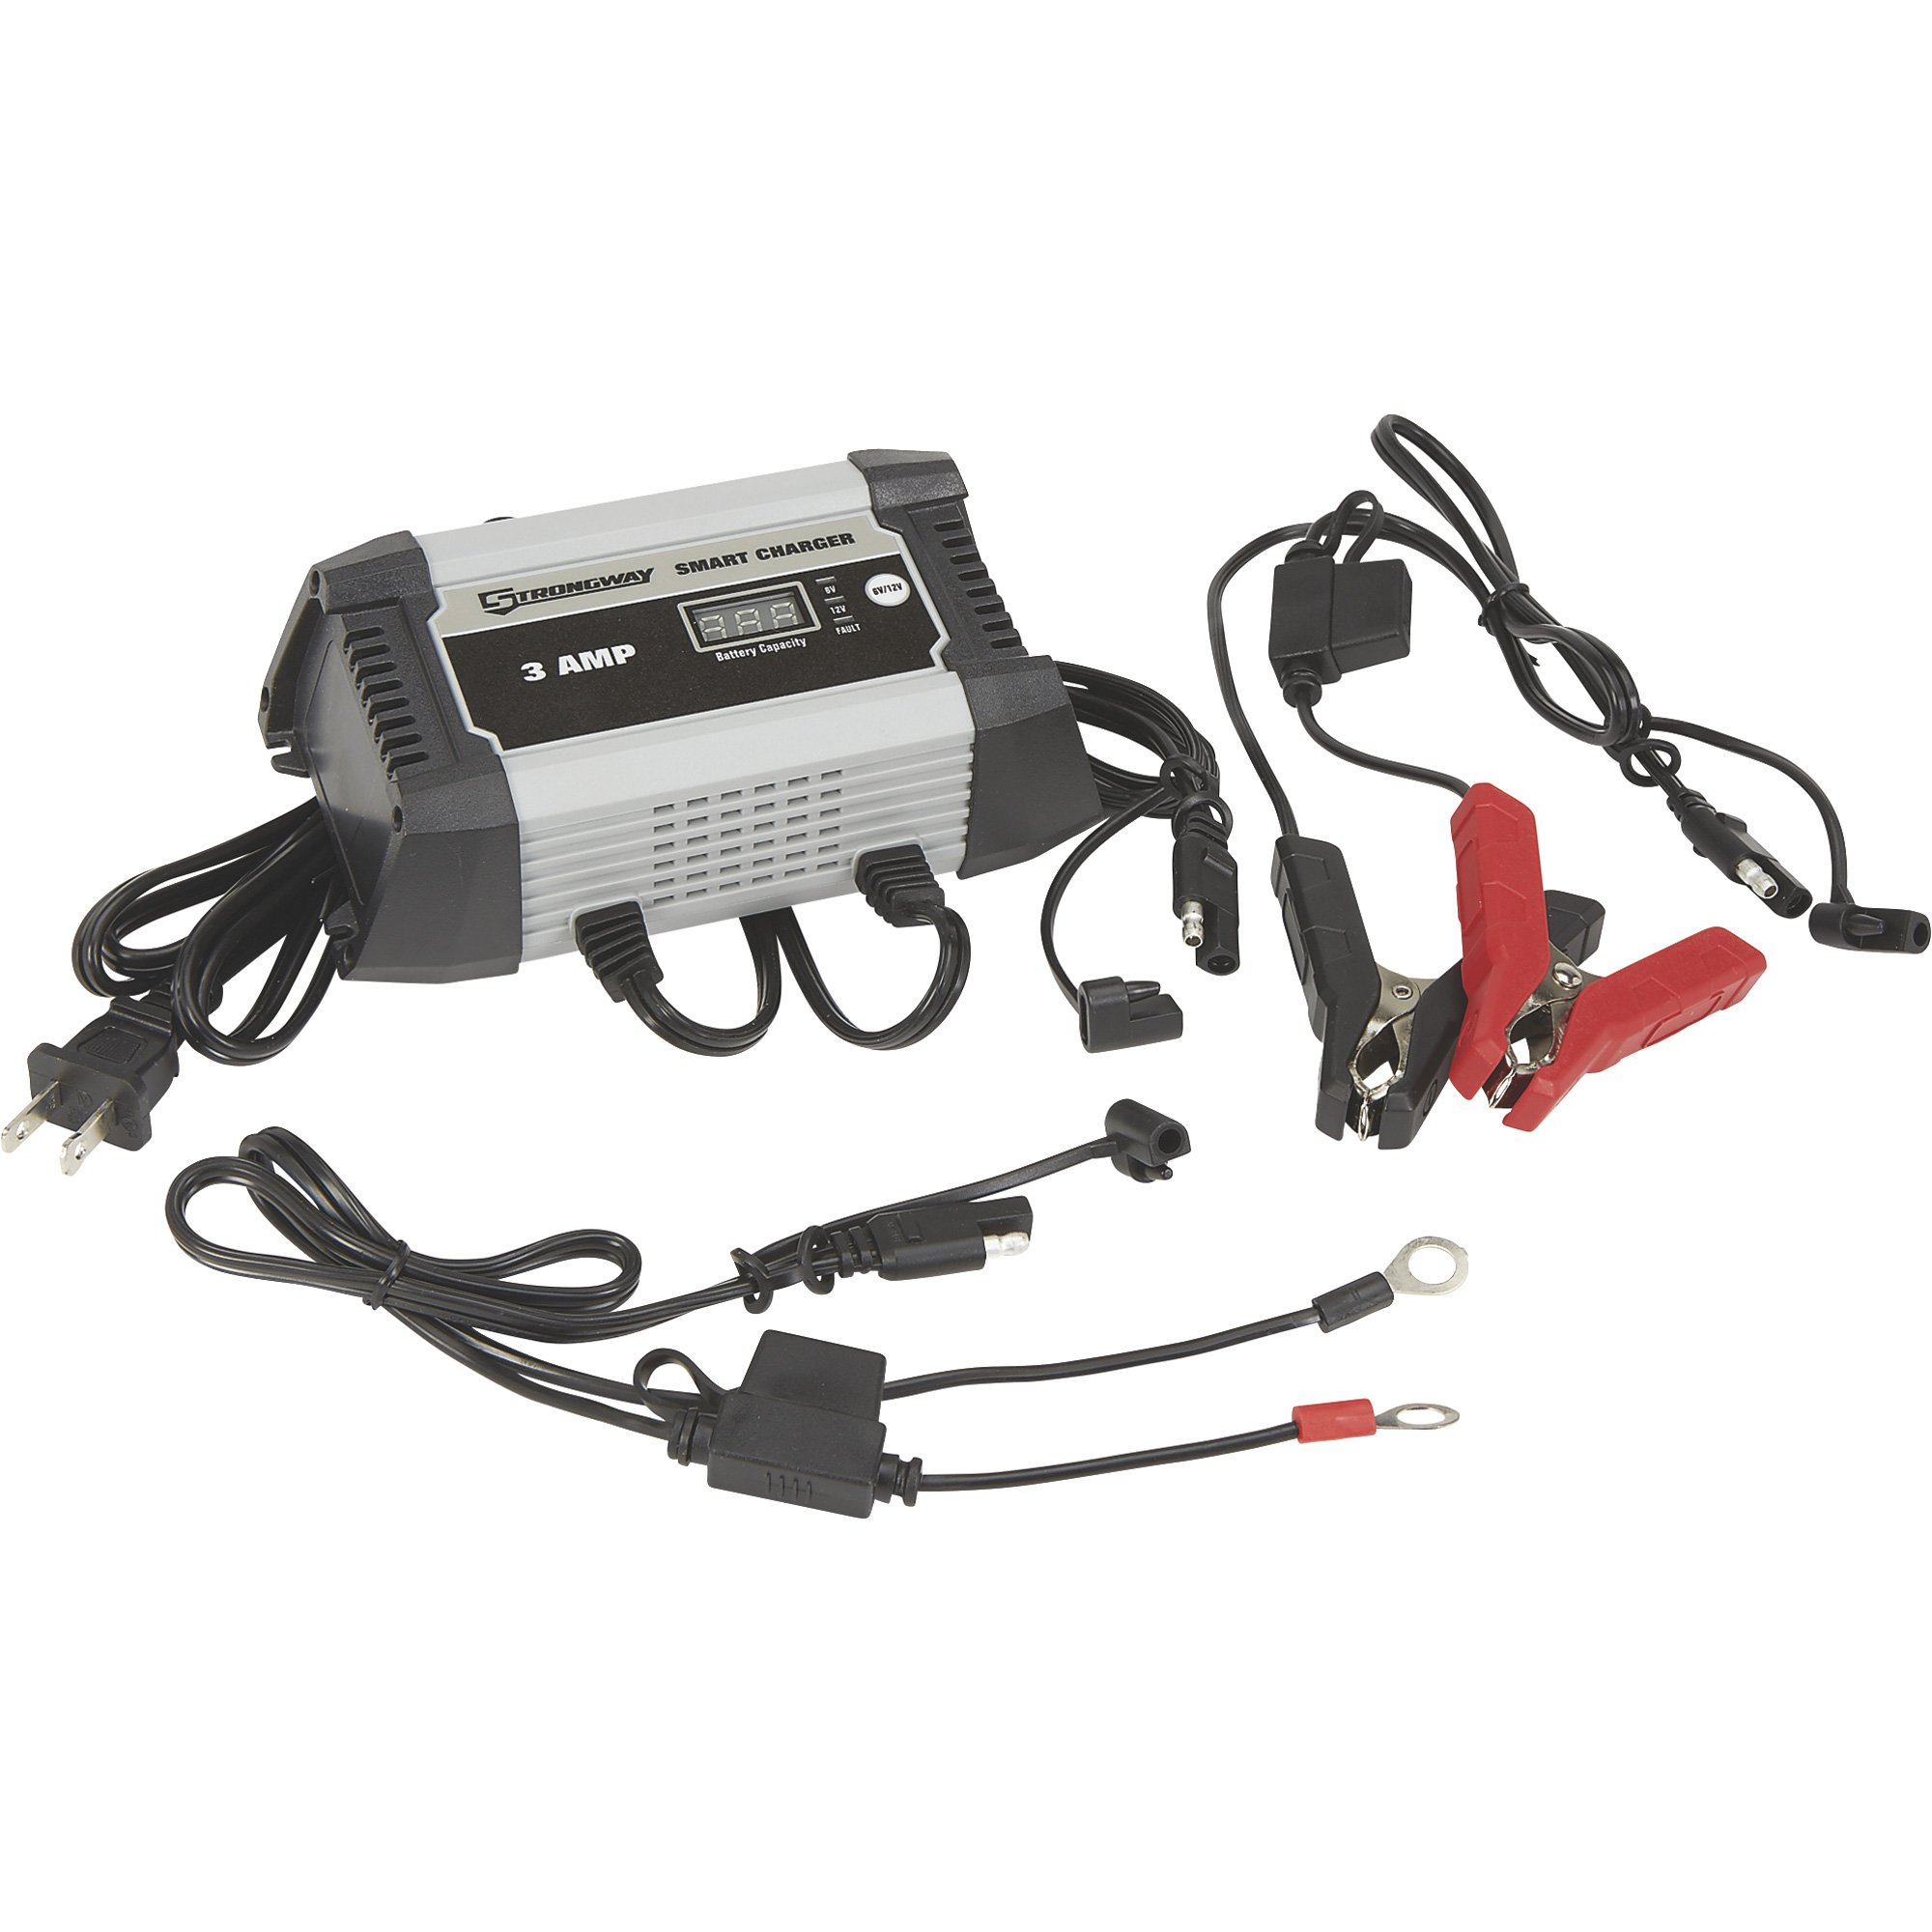 Mafell APS 18 M Battery Charger 095220 - Timberwolf Tools